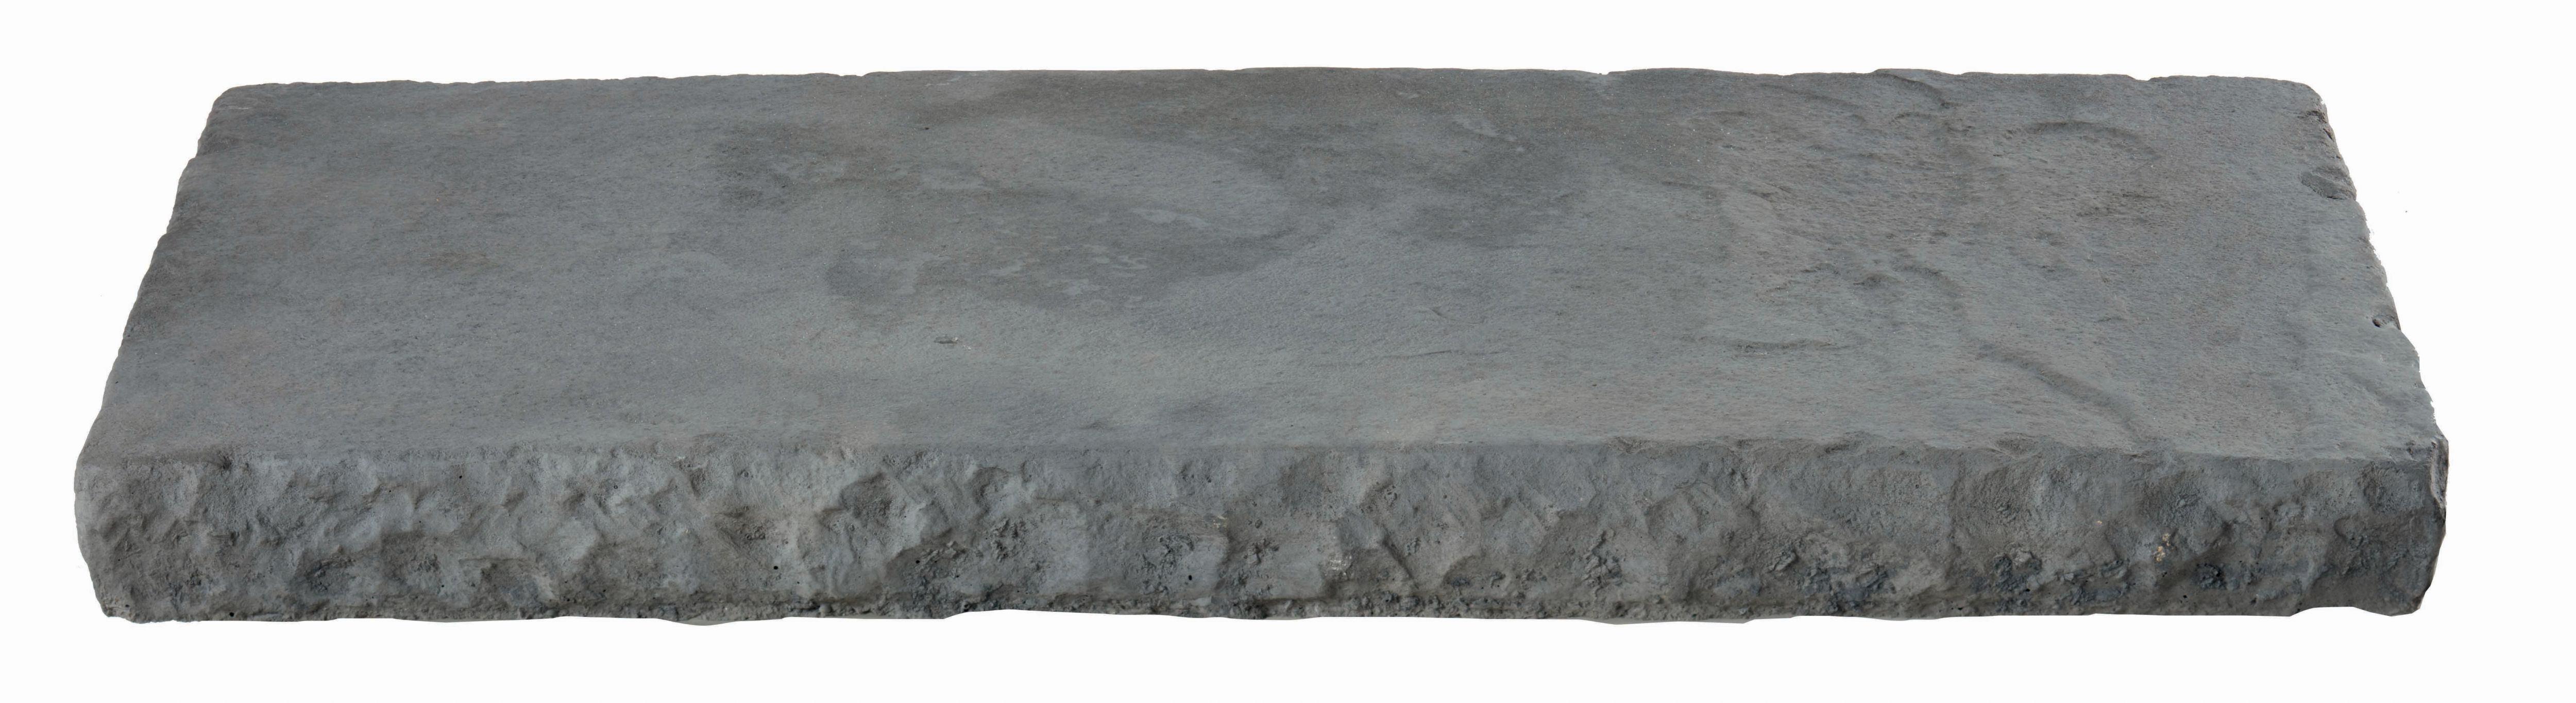 Image of Marshalls Drivesett Tegula Textured Coping Stone - Traditional 600 x 300 x 45mm Pack of 20